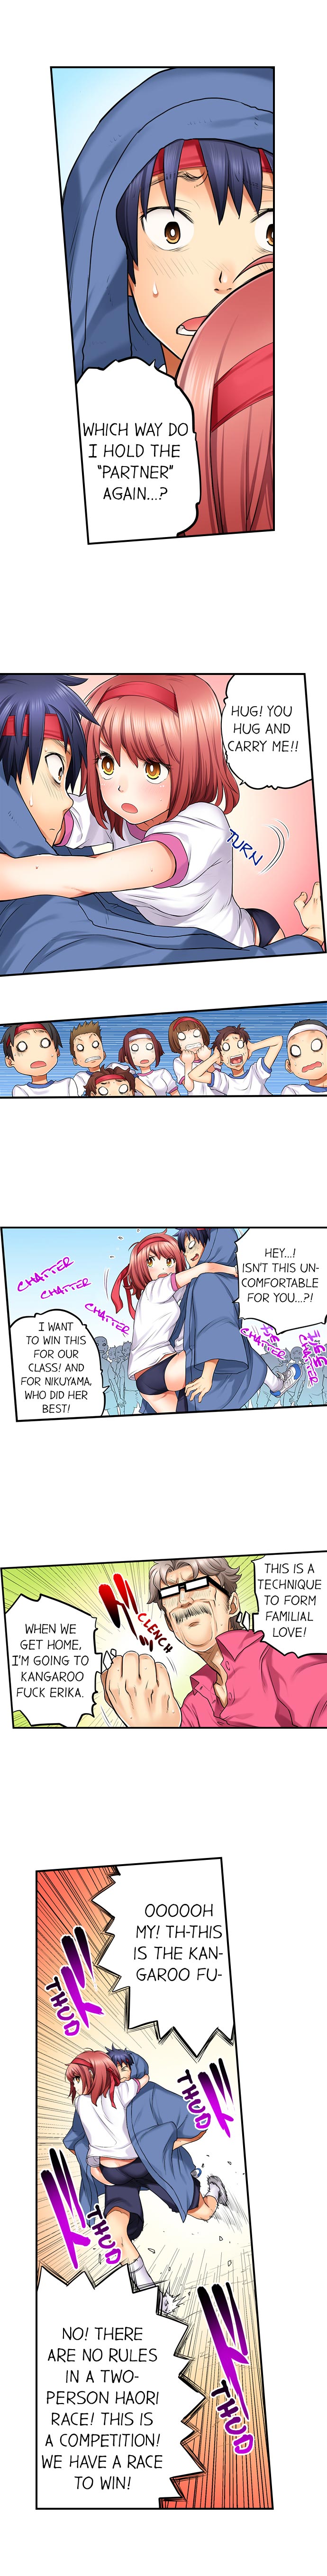 My Classmate is My Dad’s Bride, But in Bed She’s Mine. - Chapter 7 Page 7